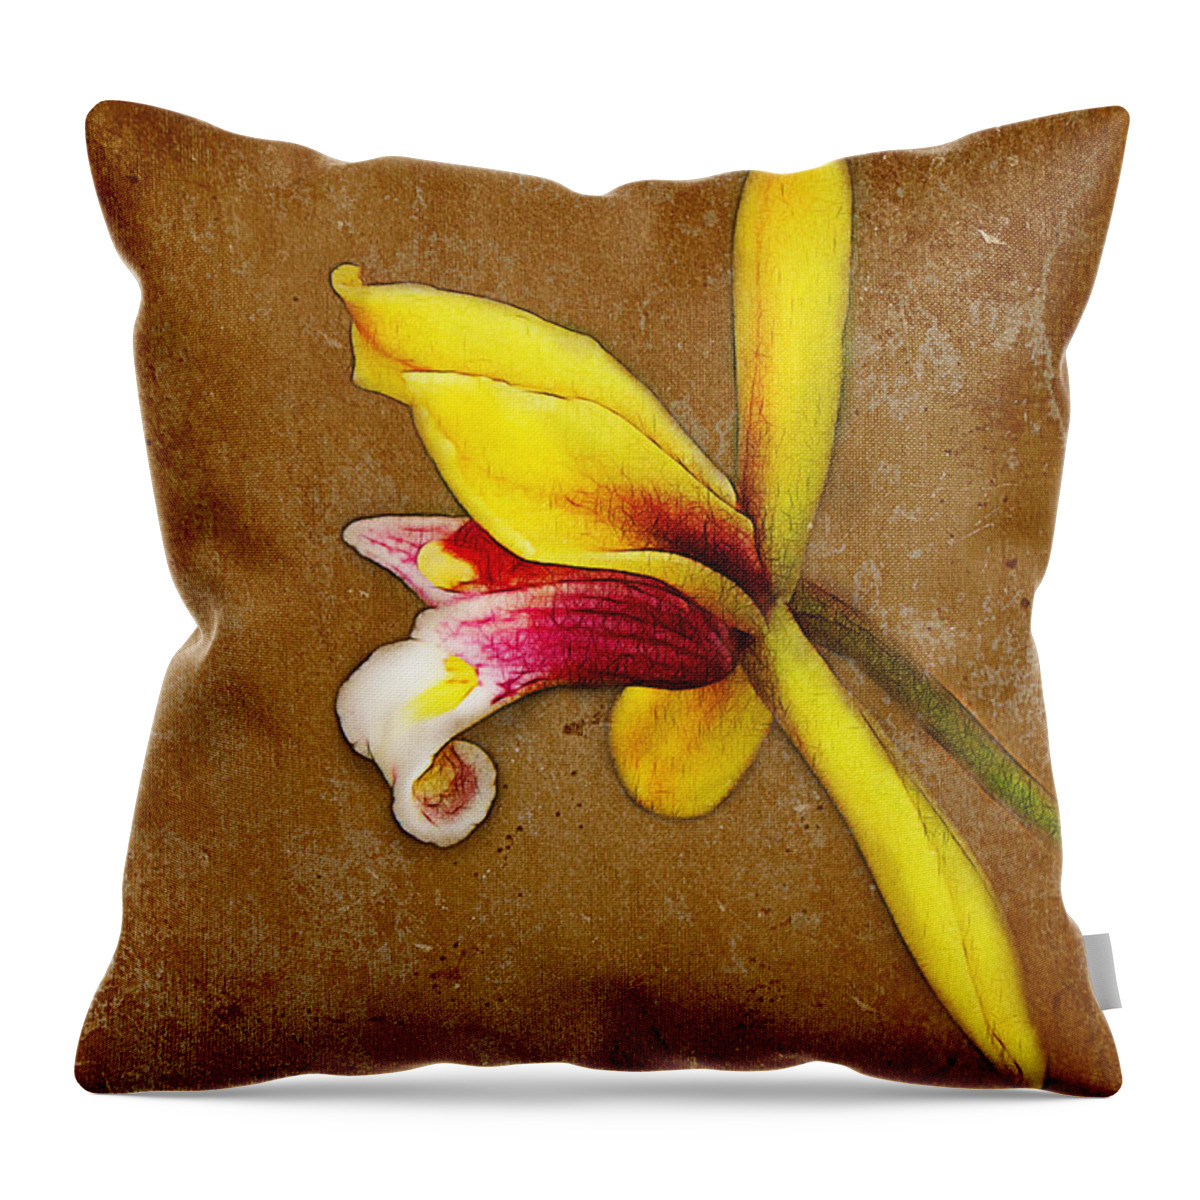 Vintage Throw Pillow featuring the photograph Vintage Orchid by Judi Bagwell